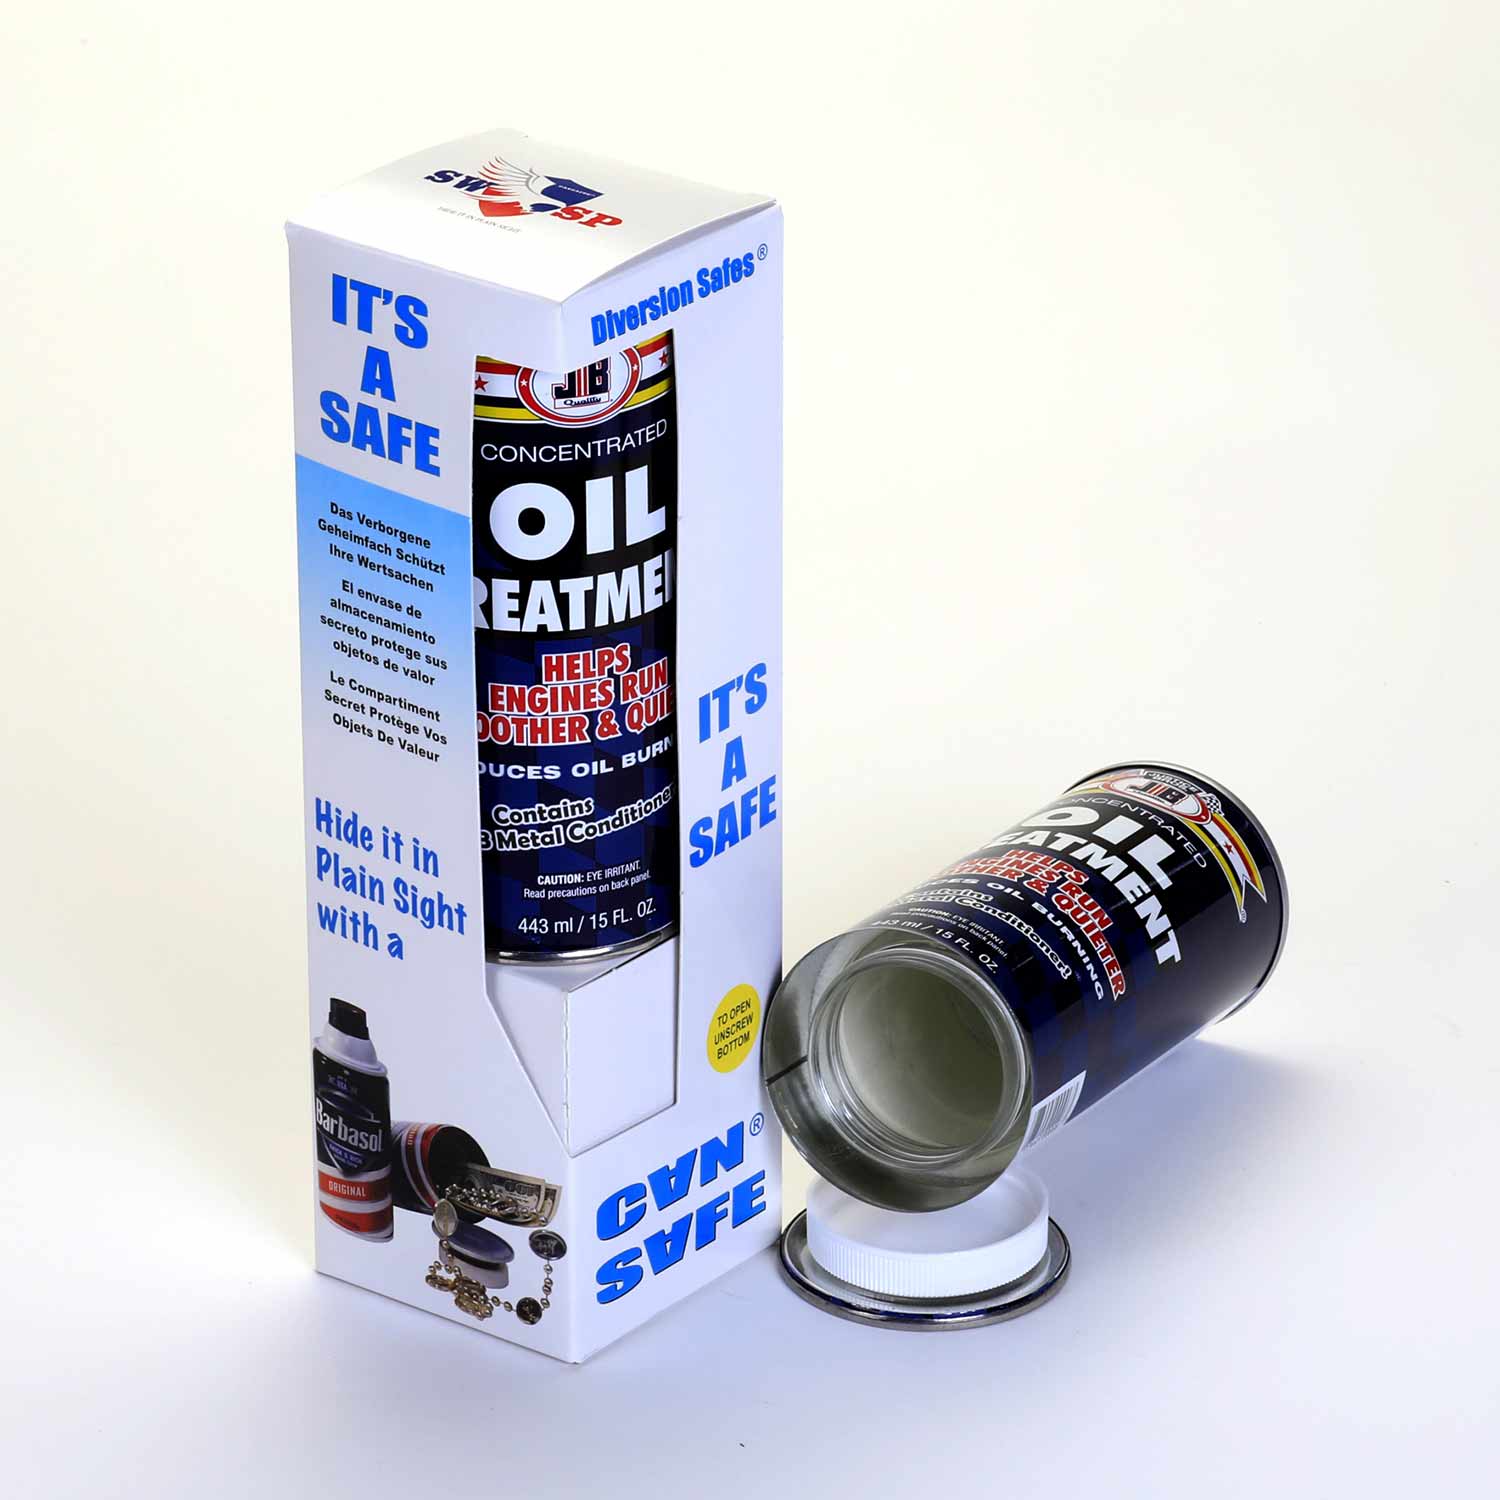 JB Oil Treatment - Diversion Can Safe - Southwest Specialty